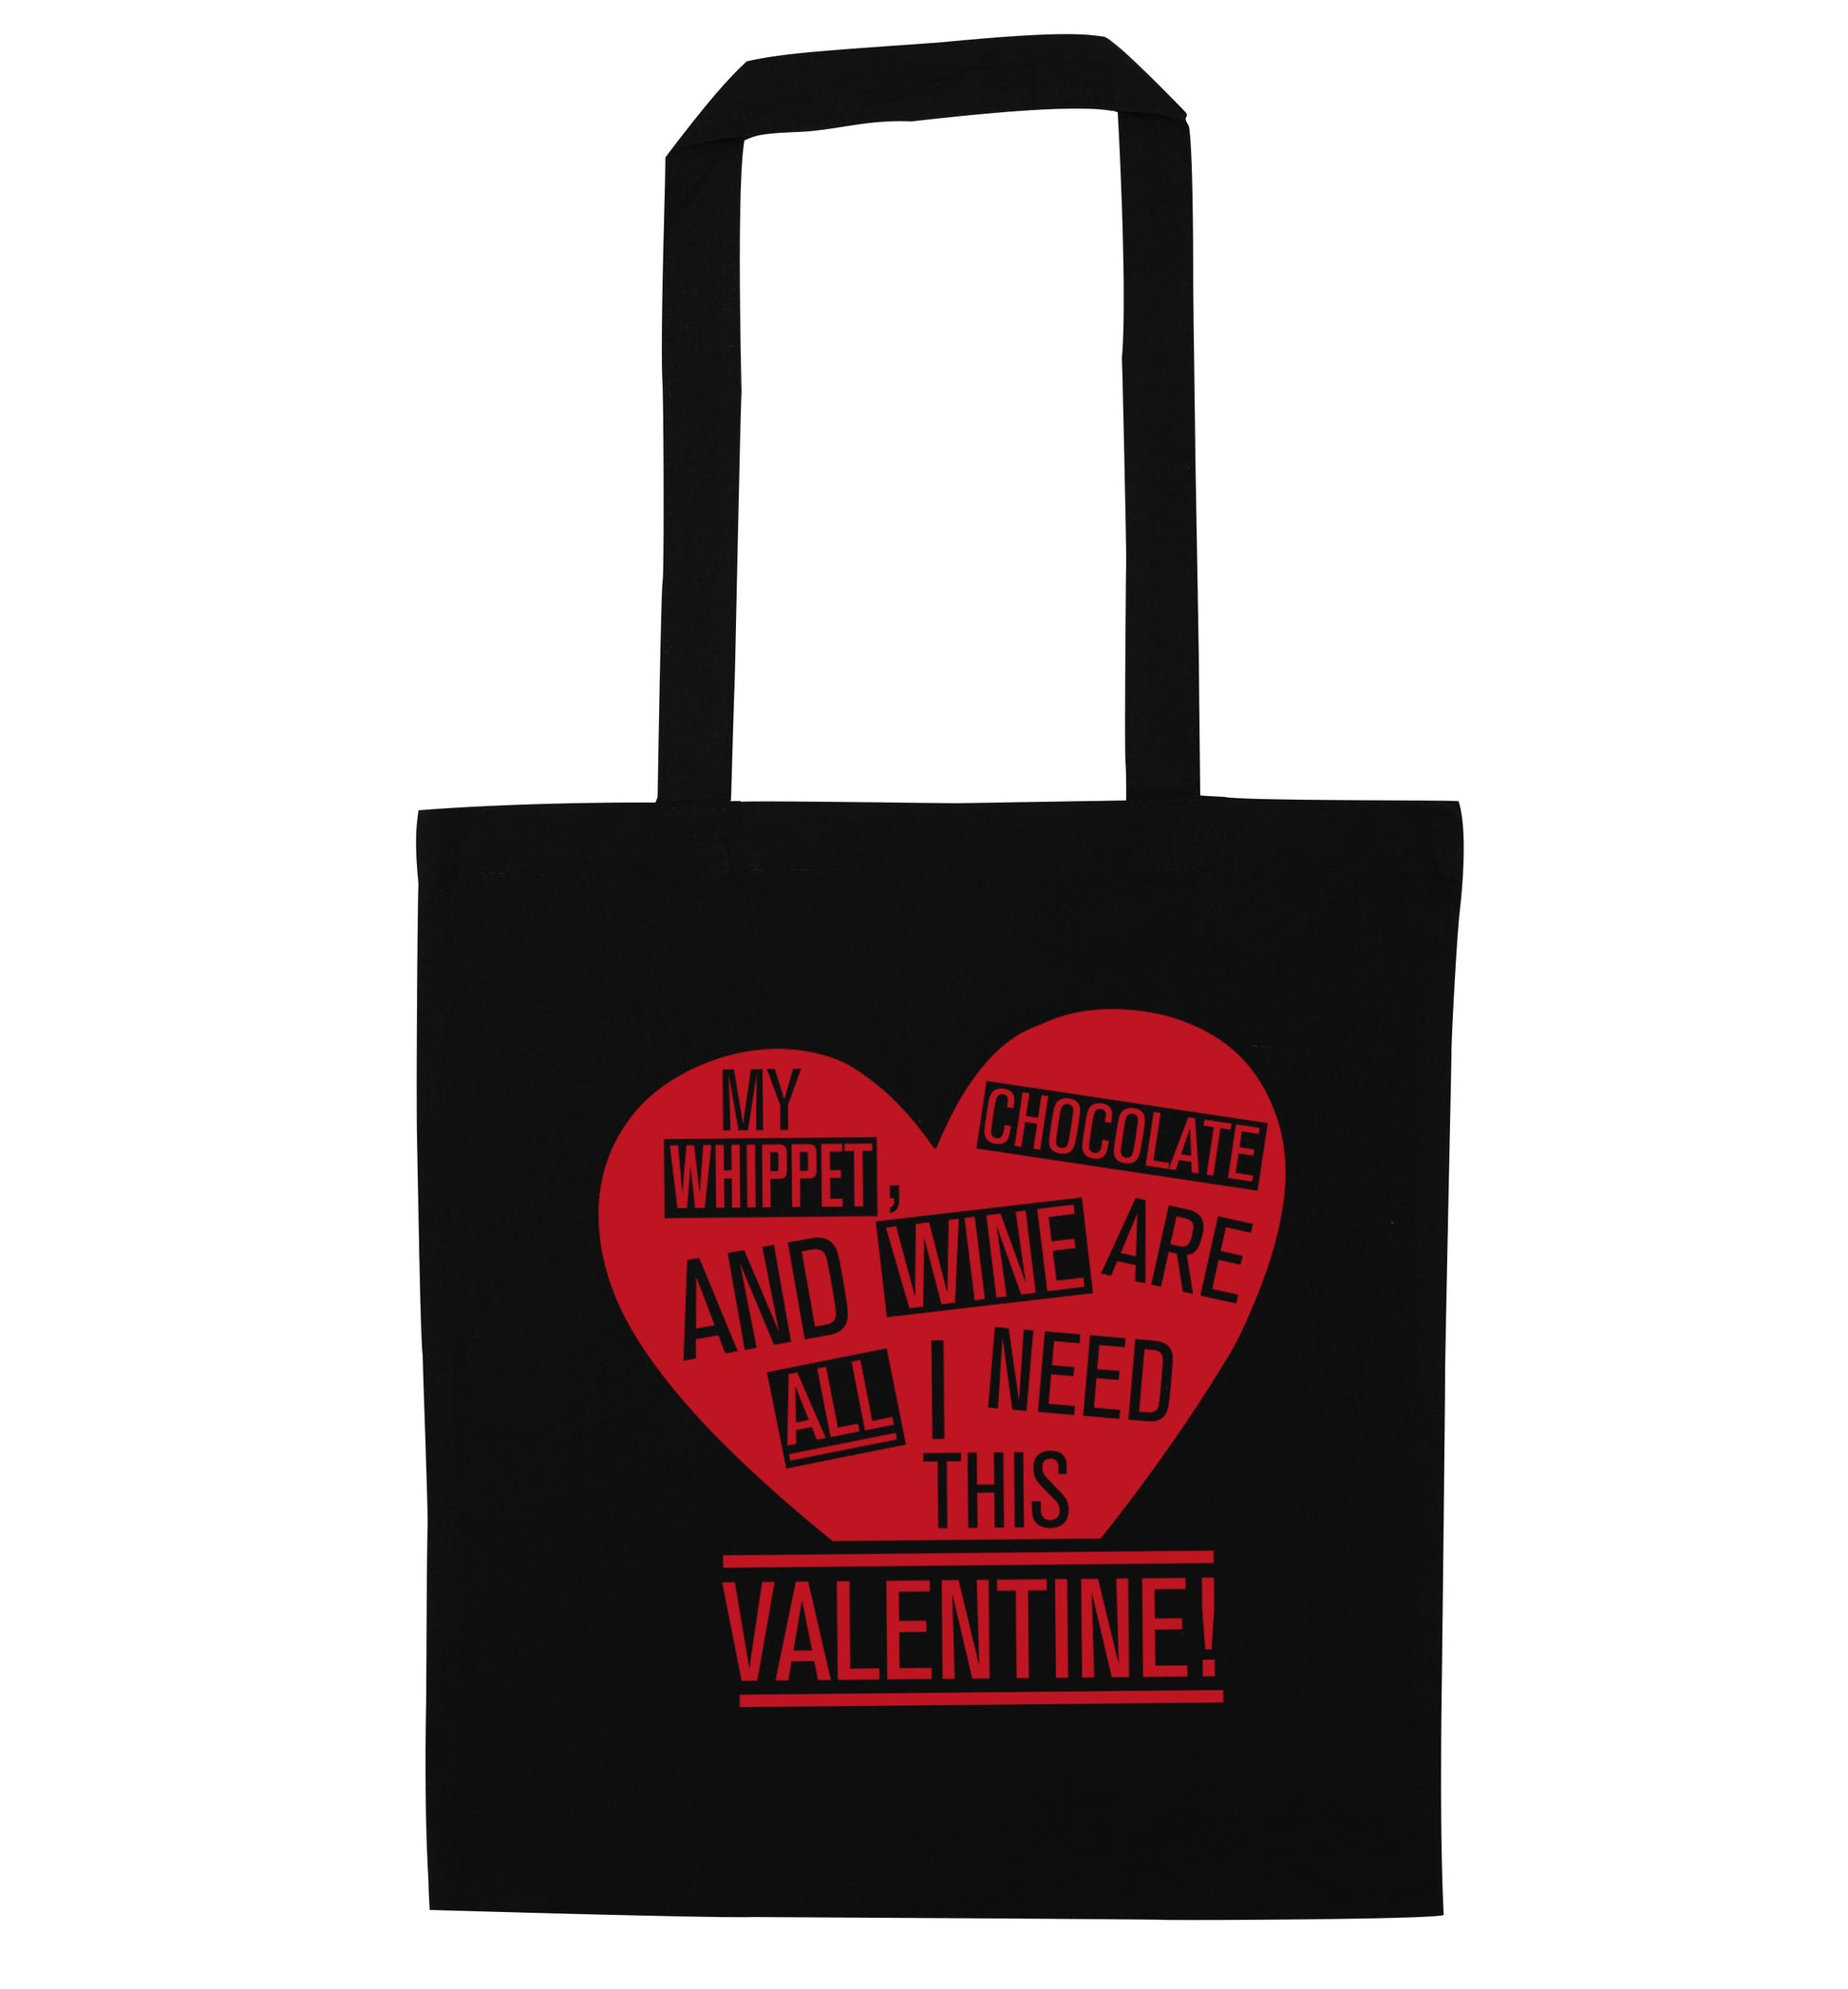 My whippet, chocolate and wine are all I need this valentine! black tote bag